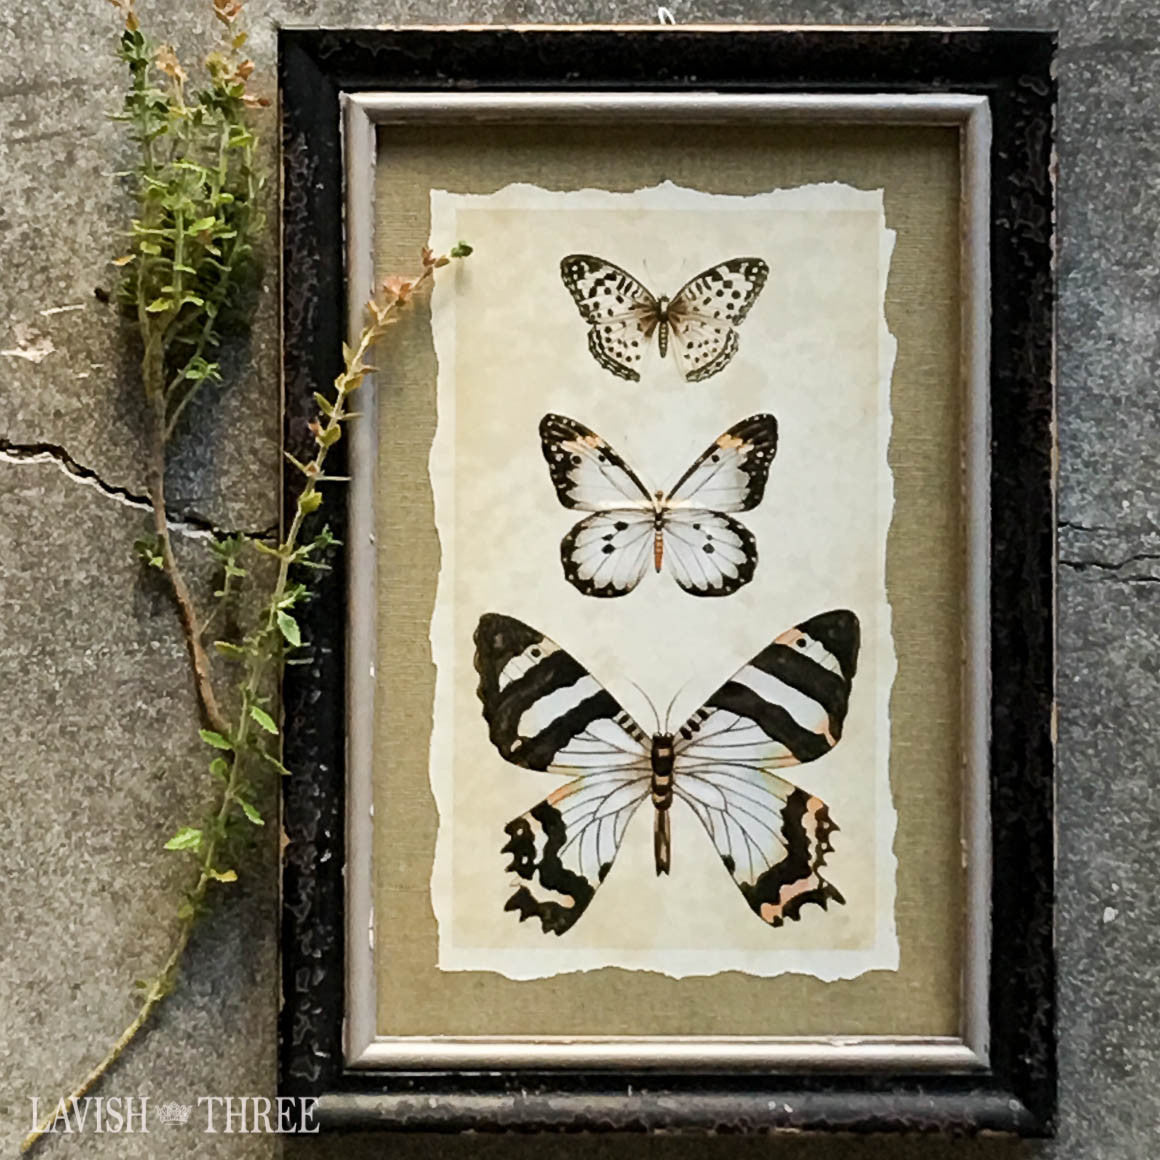 Distressed wood frame soft black butterfly vintage insect print wall decor